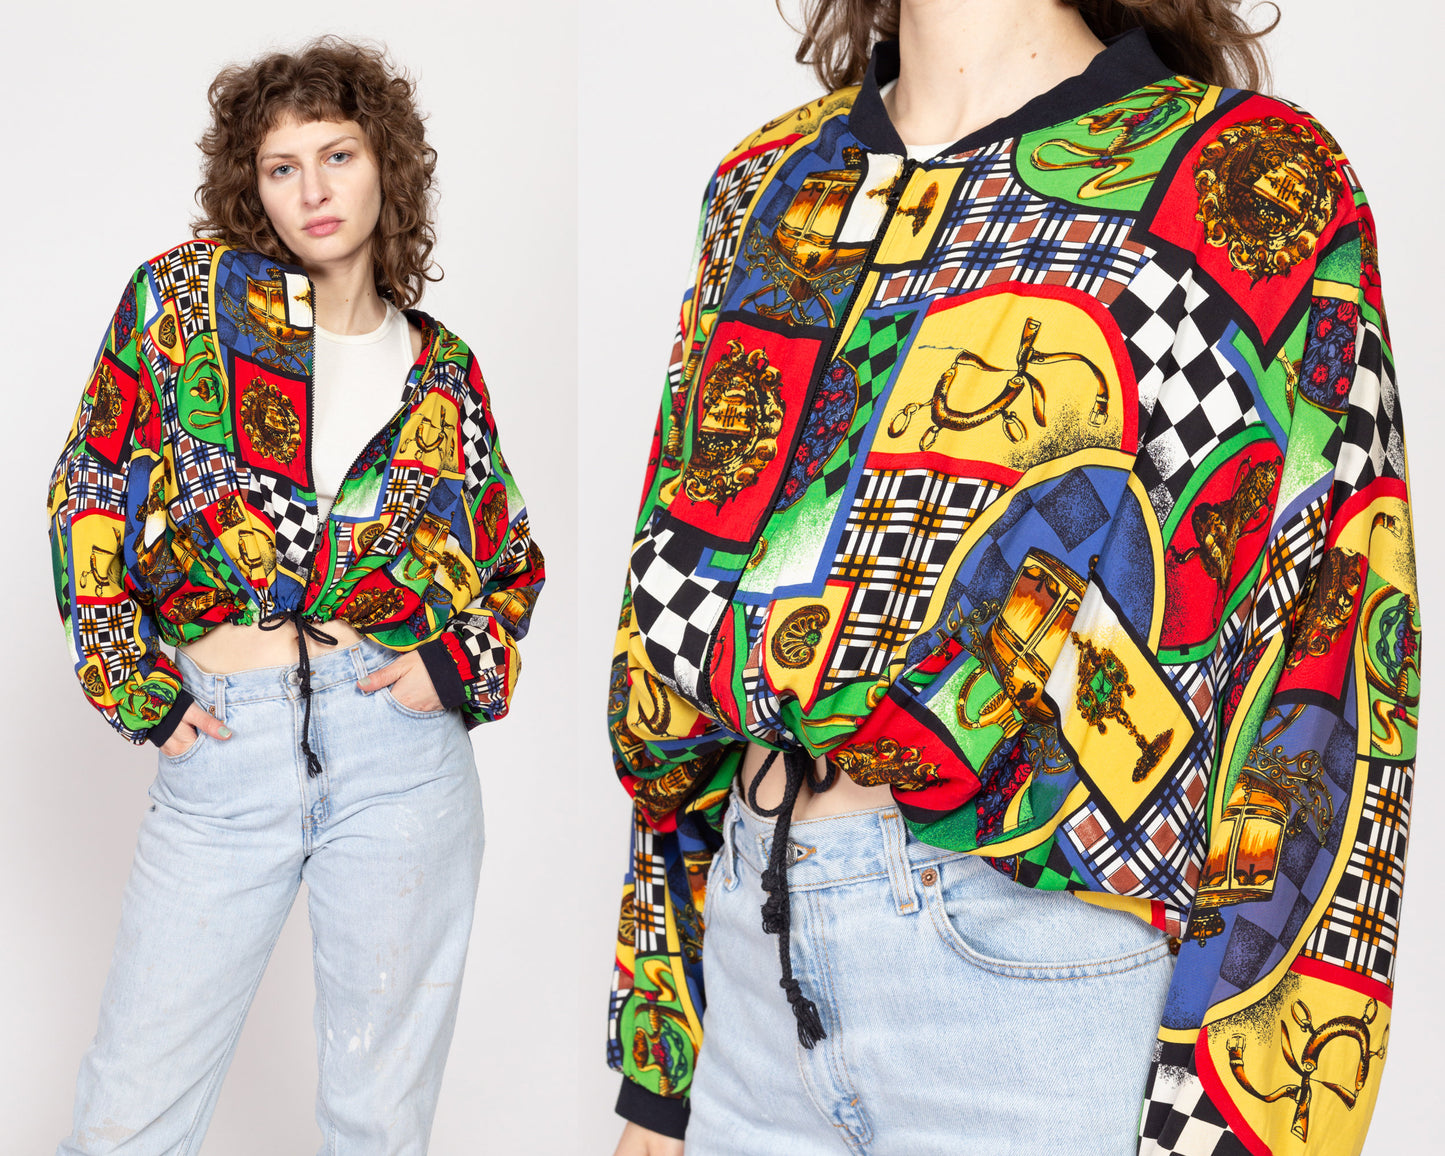 One Size 80s Baroque Print Cropped Bomber Jacket | Vintage Drawstring Waist Grunge Red Green Slouchy Zip Up Lightweight Jacket